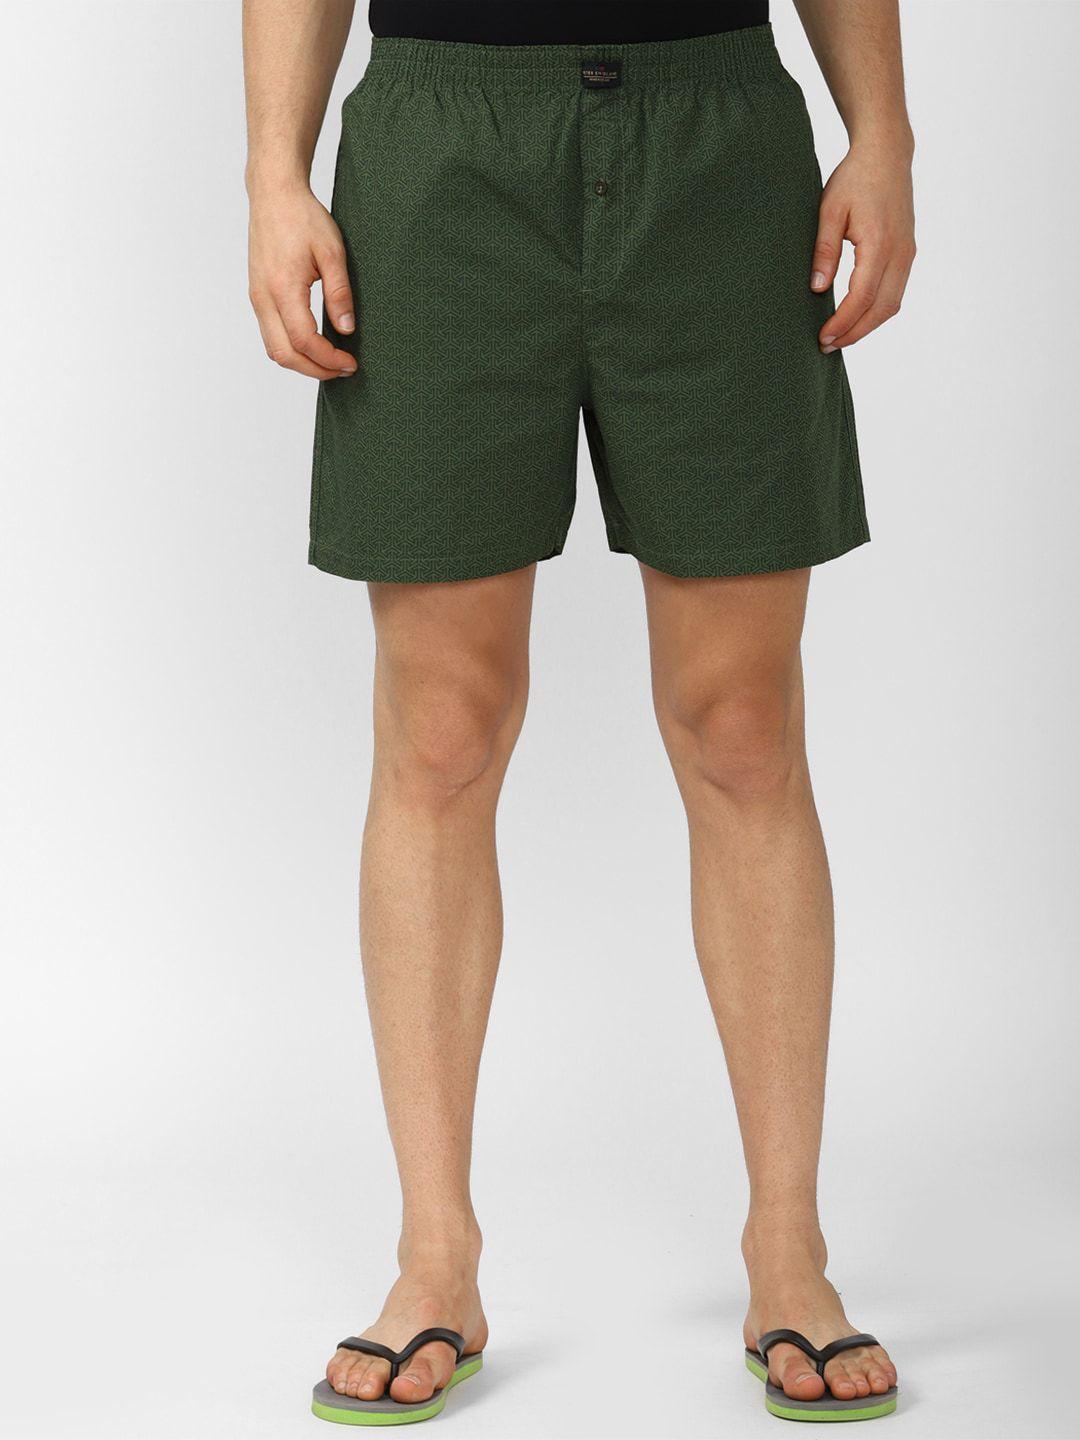 peter england men olive green printed pure cotton boxers